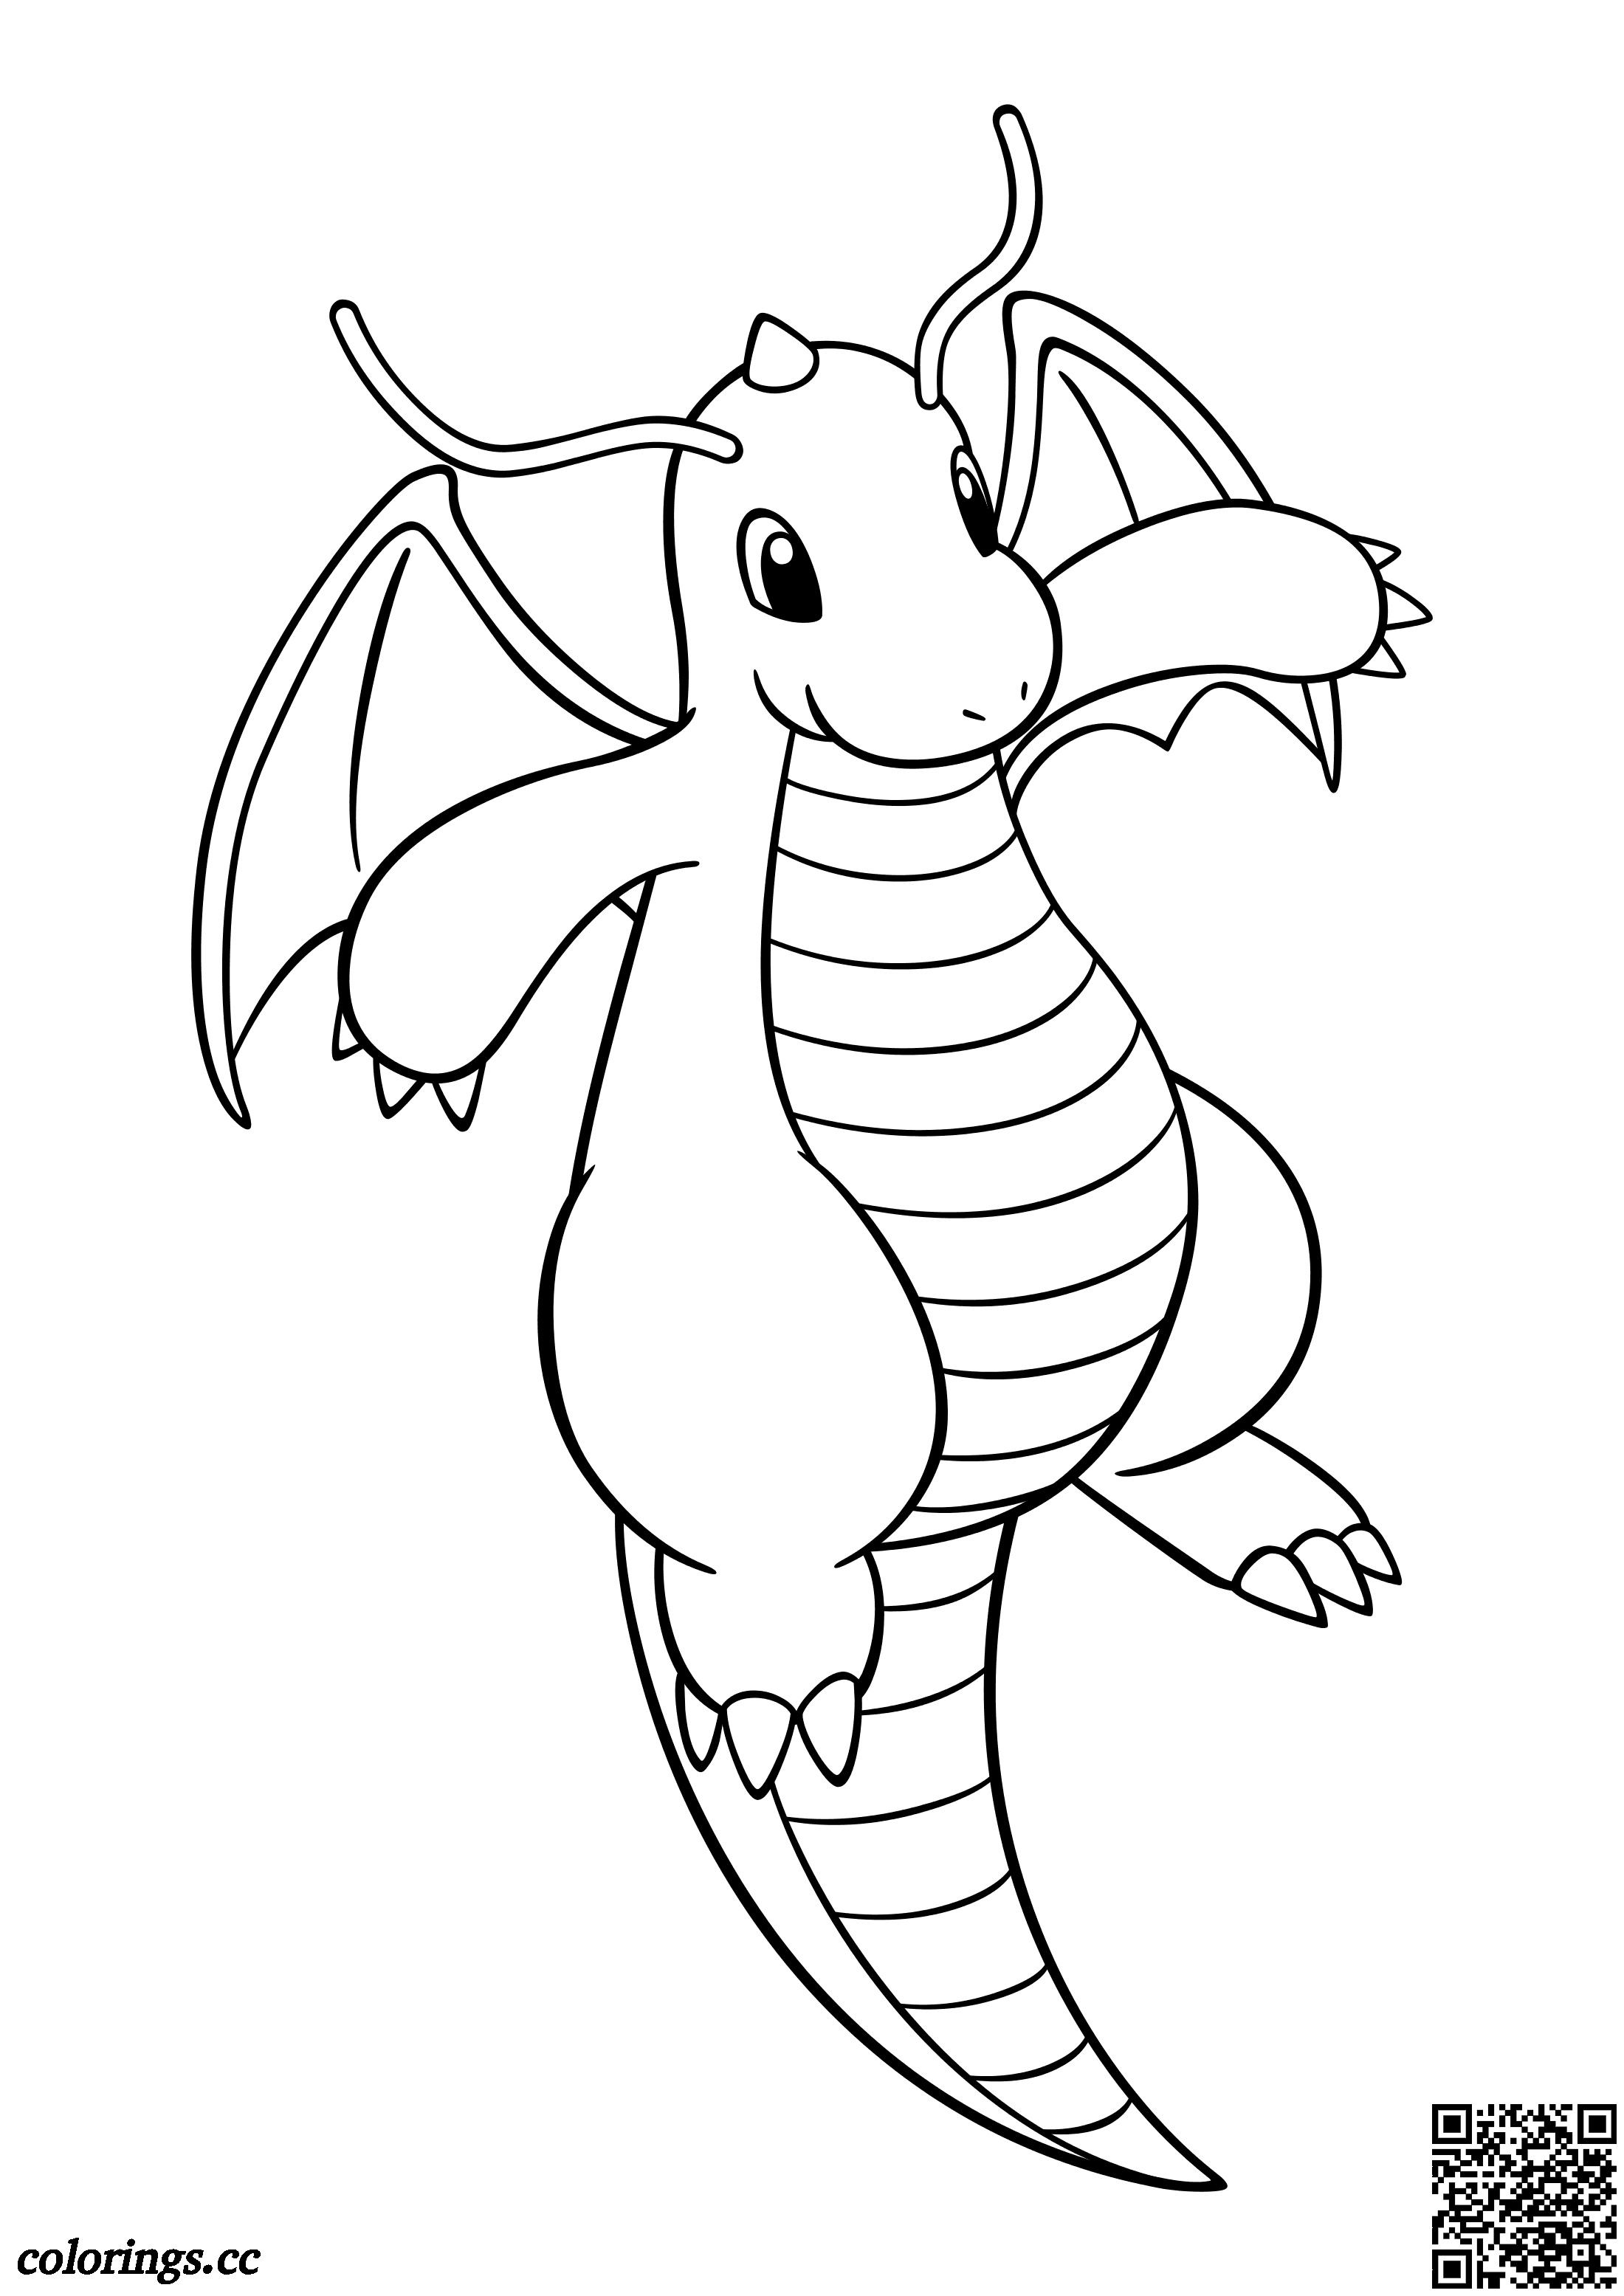 149 - Dragonite coloring pages, Pokemon coloring pages - Colorings.cc